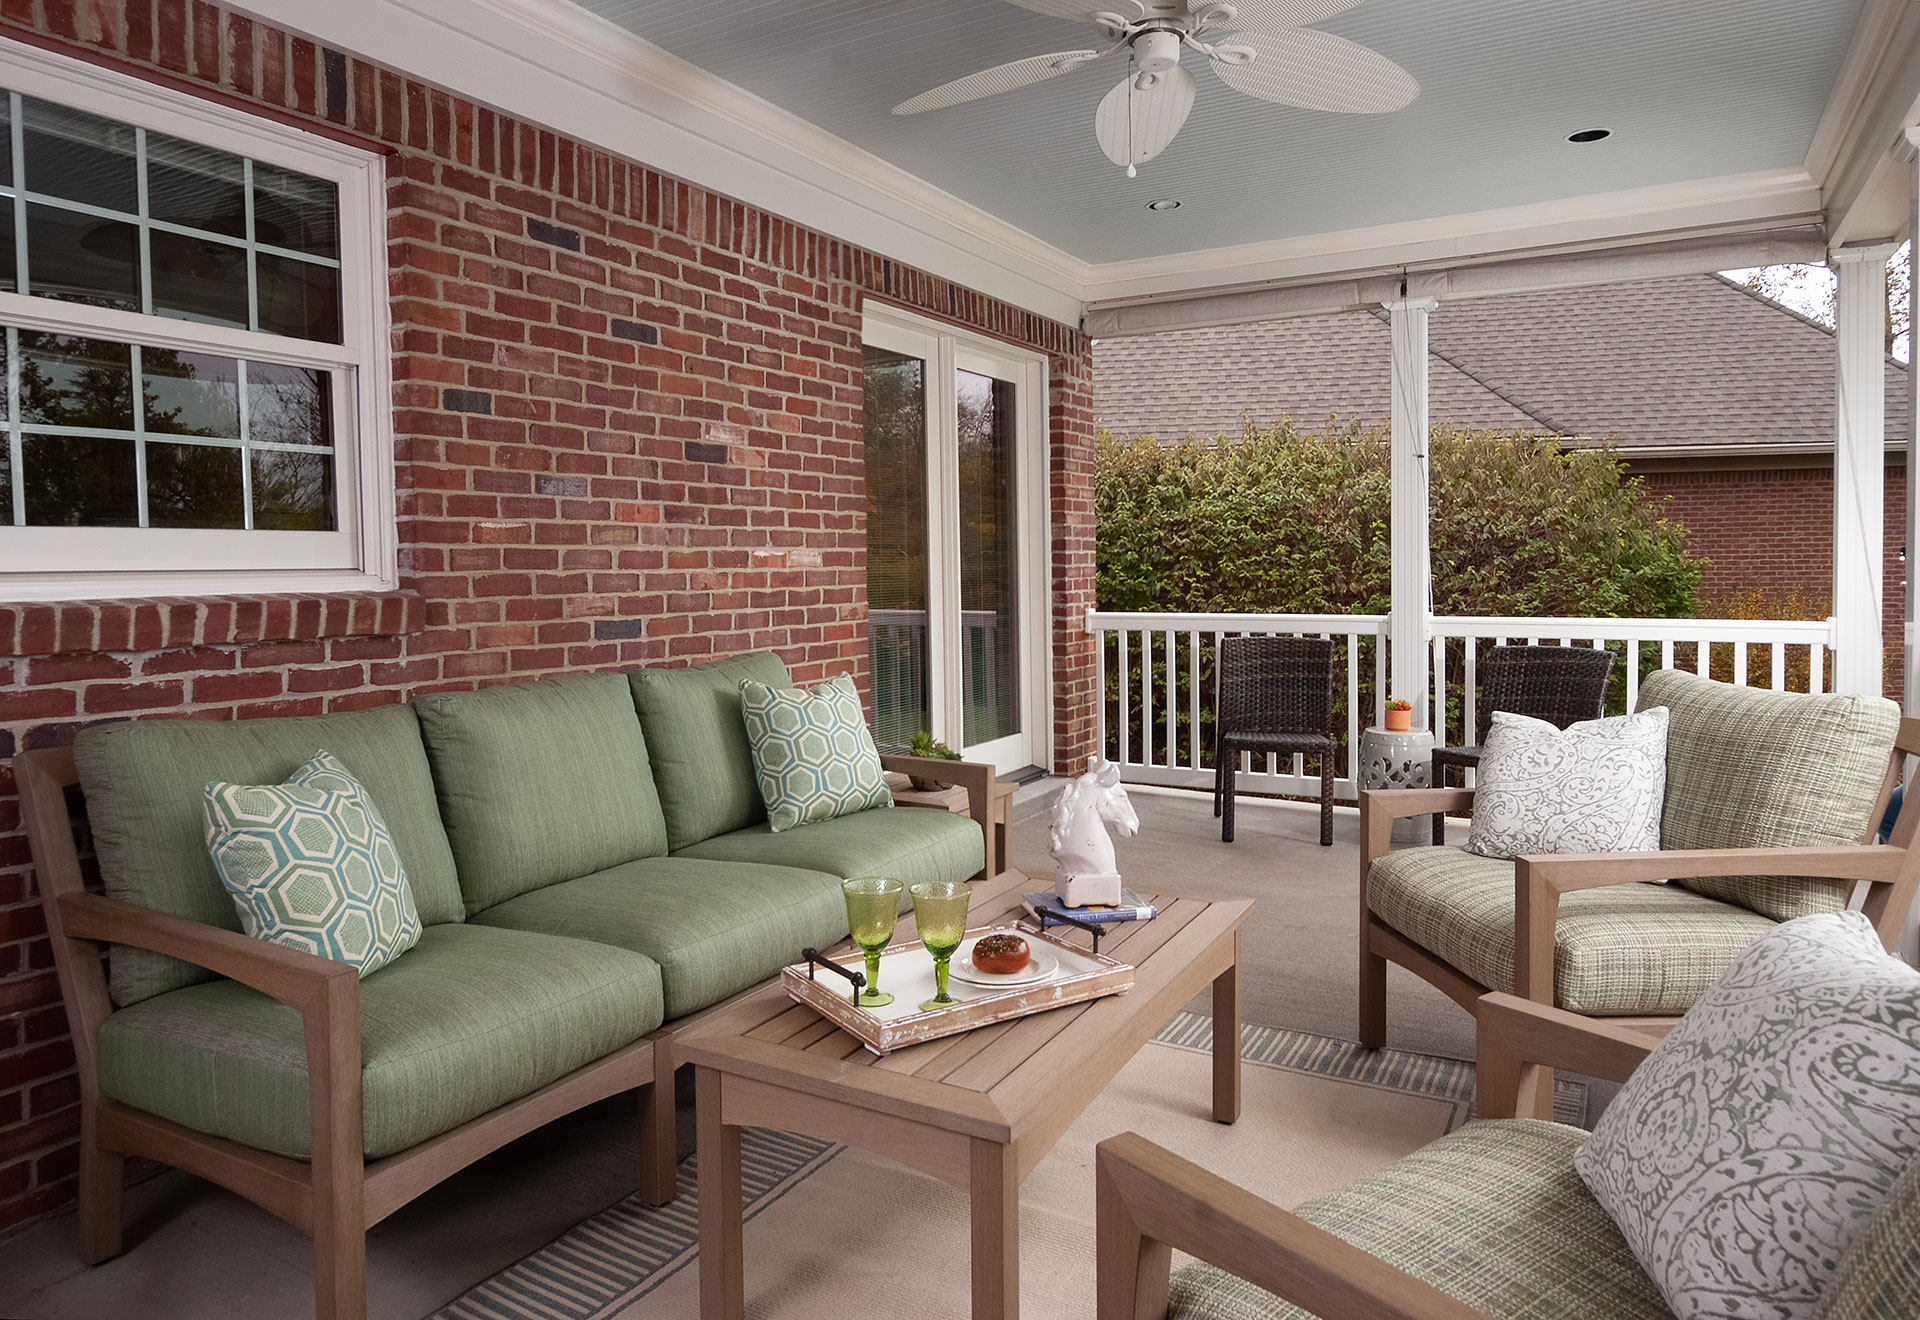 Prepare your porch for spring: Consider these decor tips